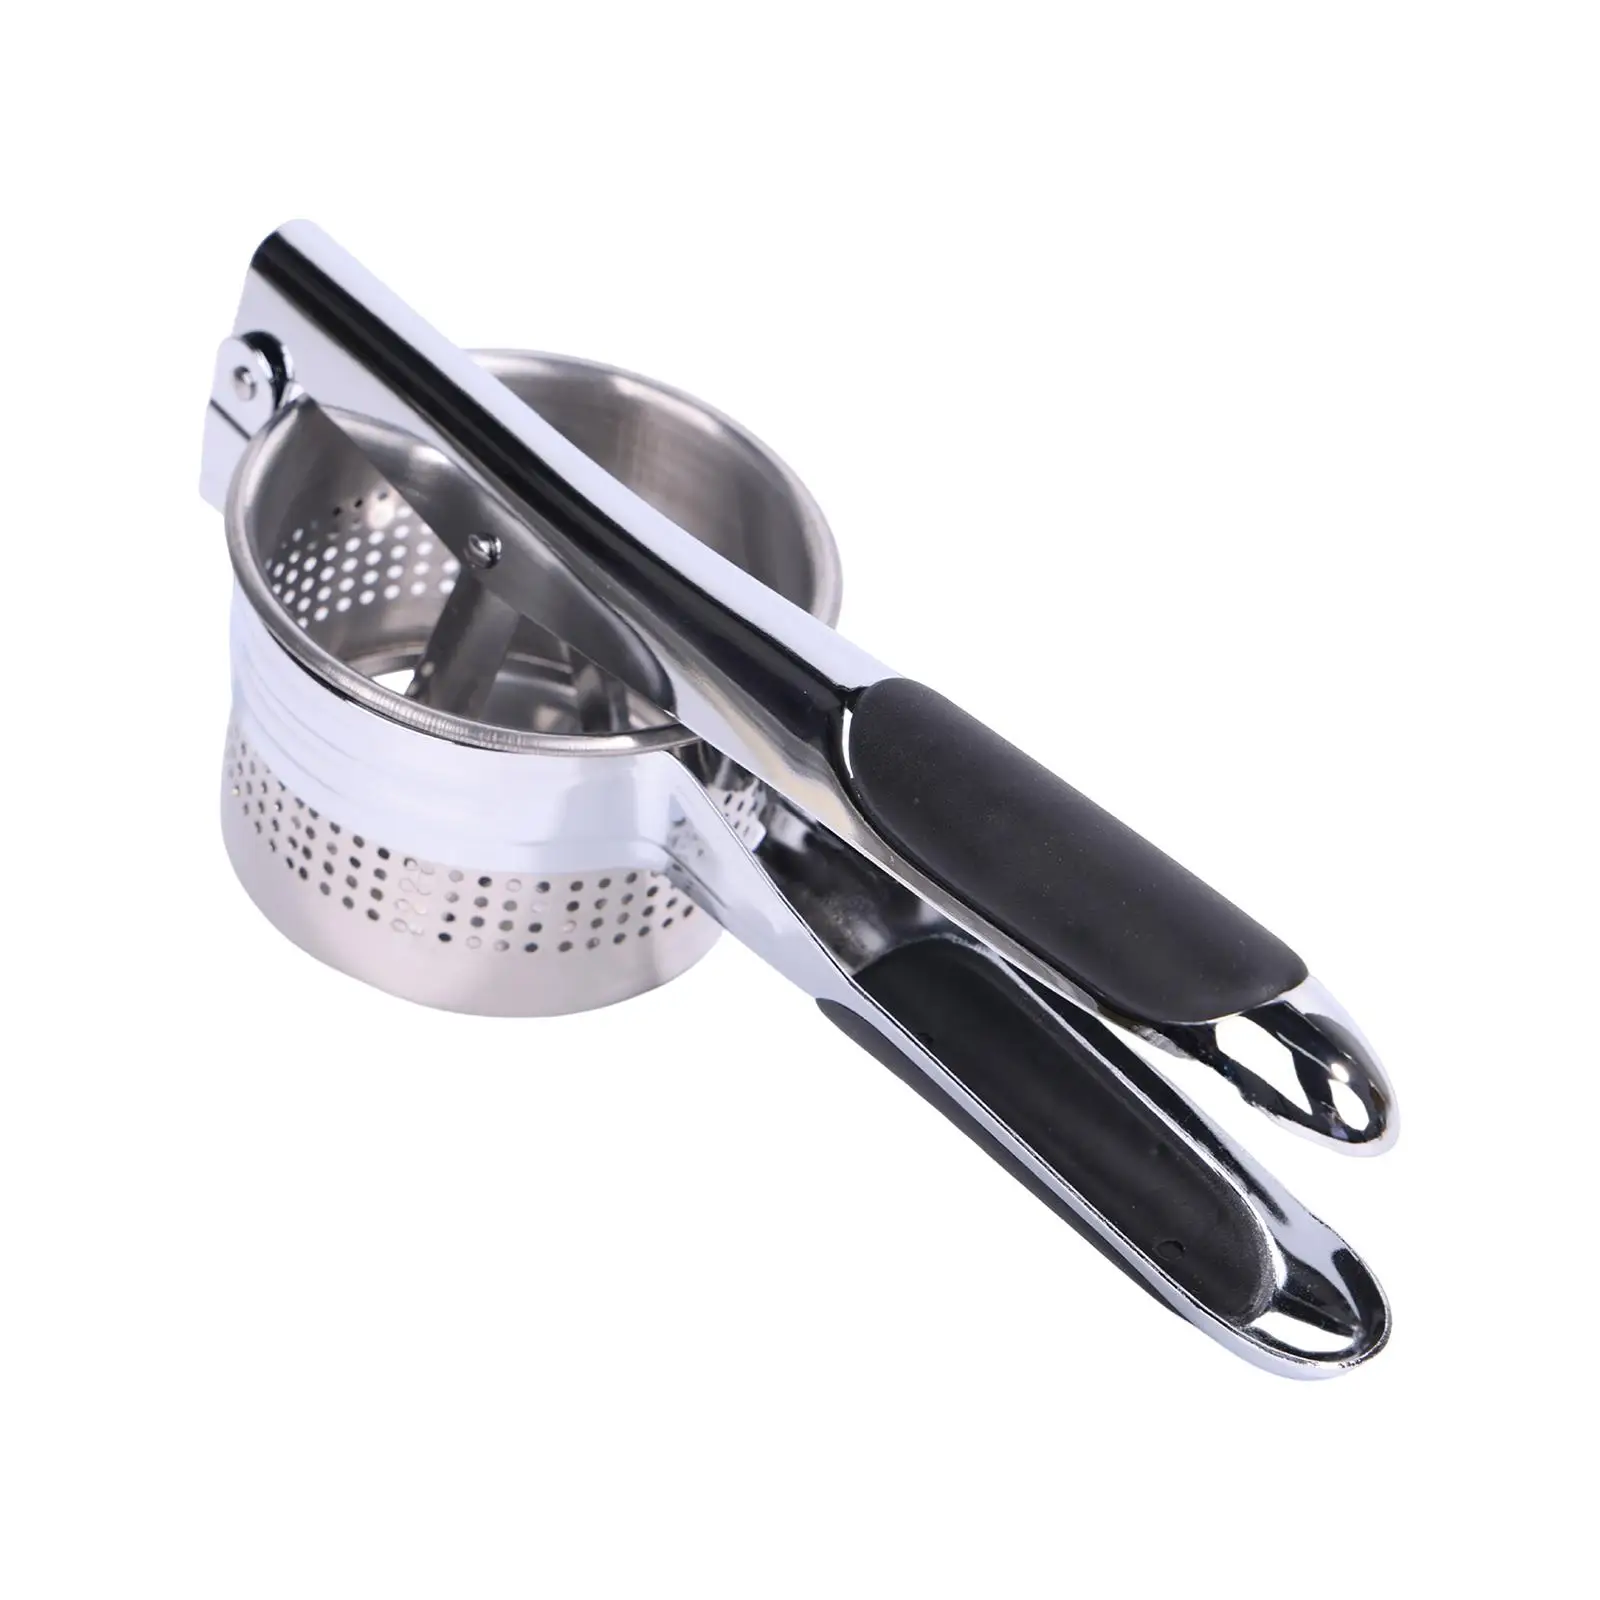 Fruit Lemon Squeezer Potato Ricer Professional Mashed Heavy Duty Hand Juicer Press for Kitchen Home Pinic Outdoor Grapefruit